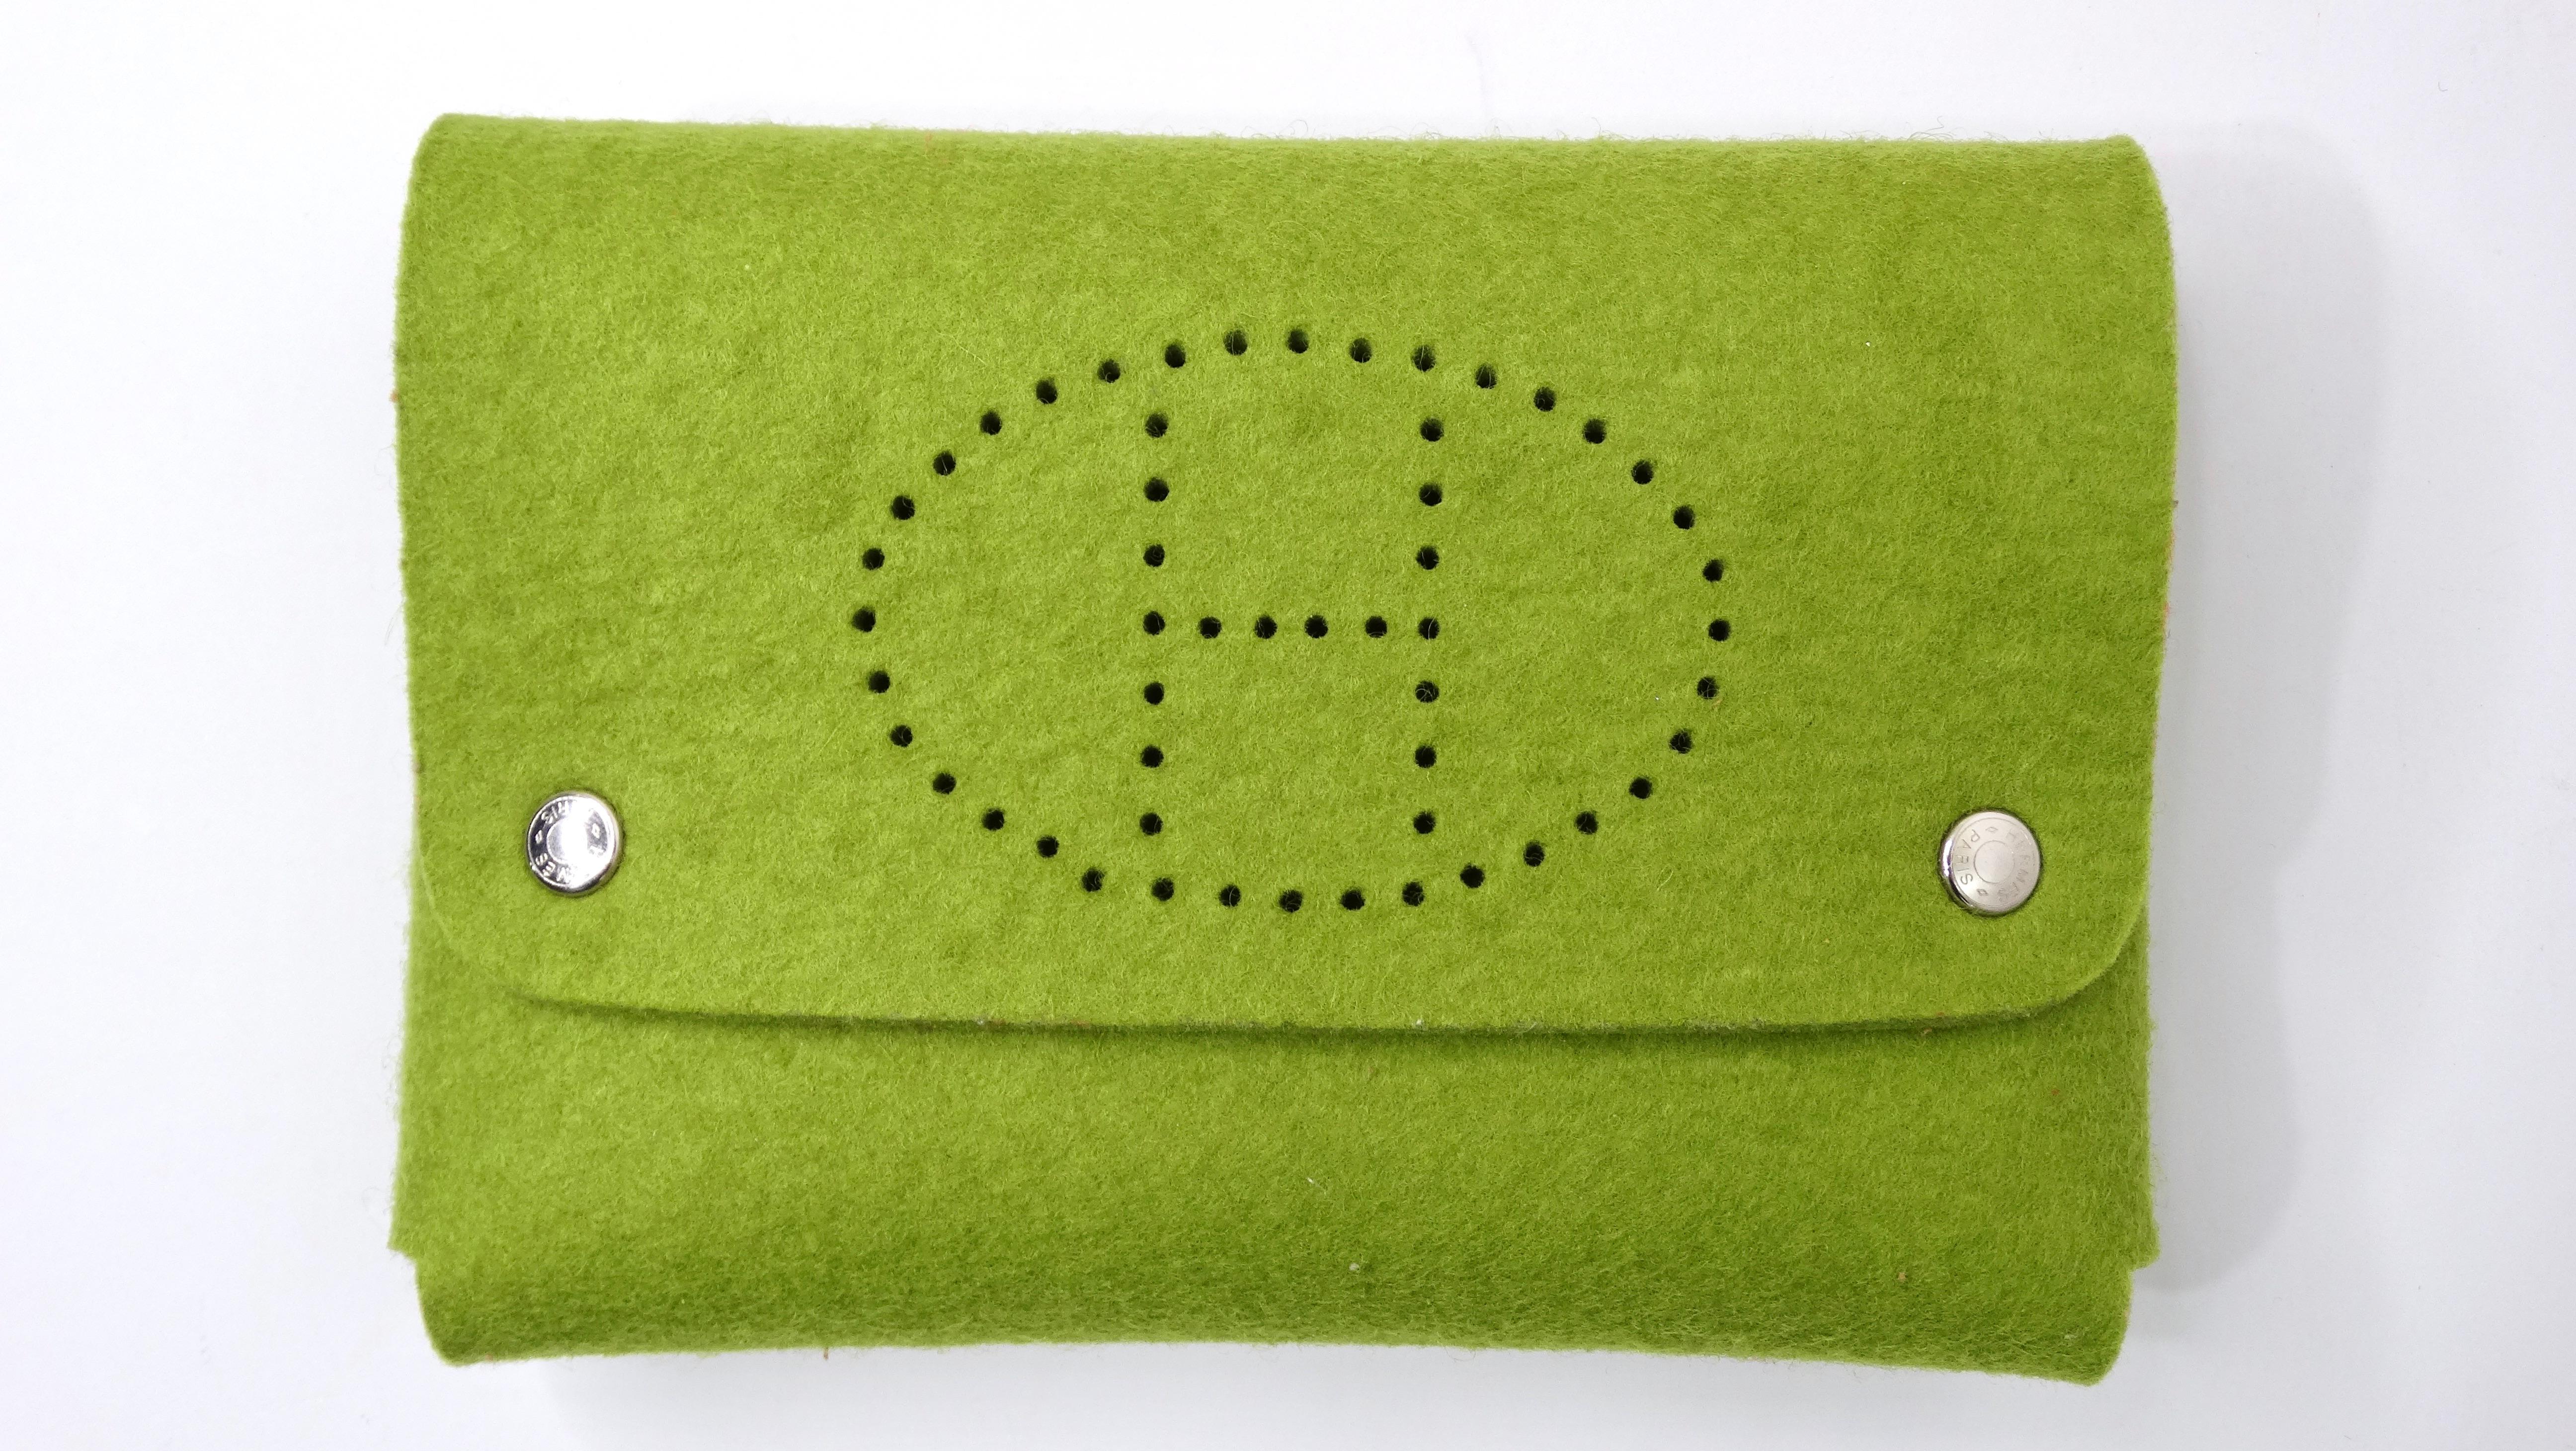 Hermès Green Perforated Felt Evelyn Flap Pouch  In Excellent Condition For Sale In Scottsdale, AZ